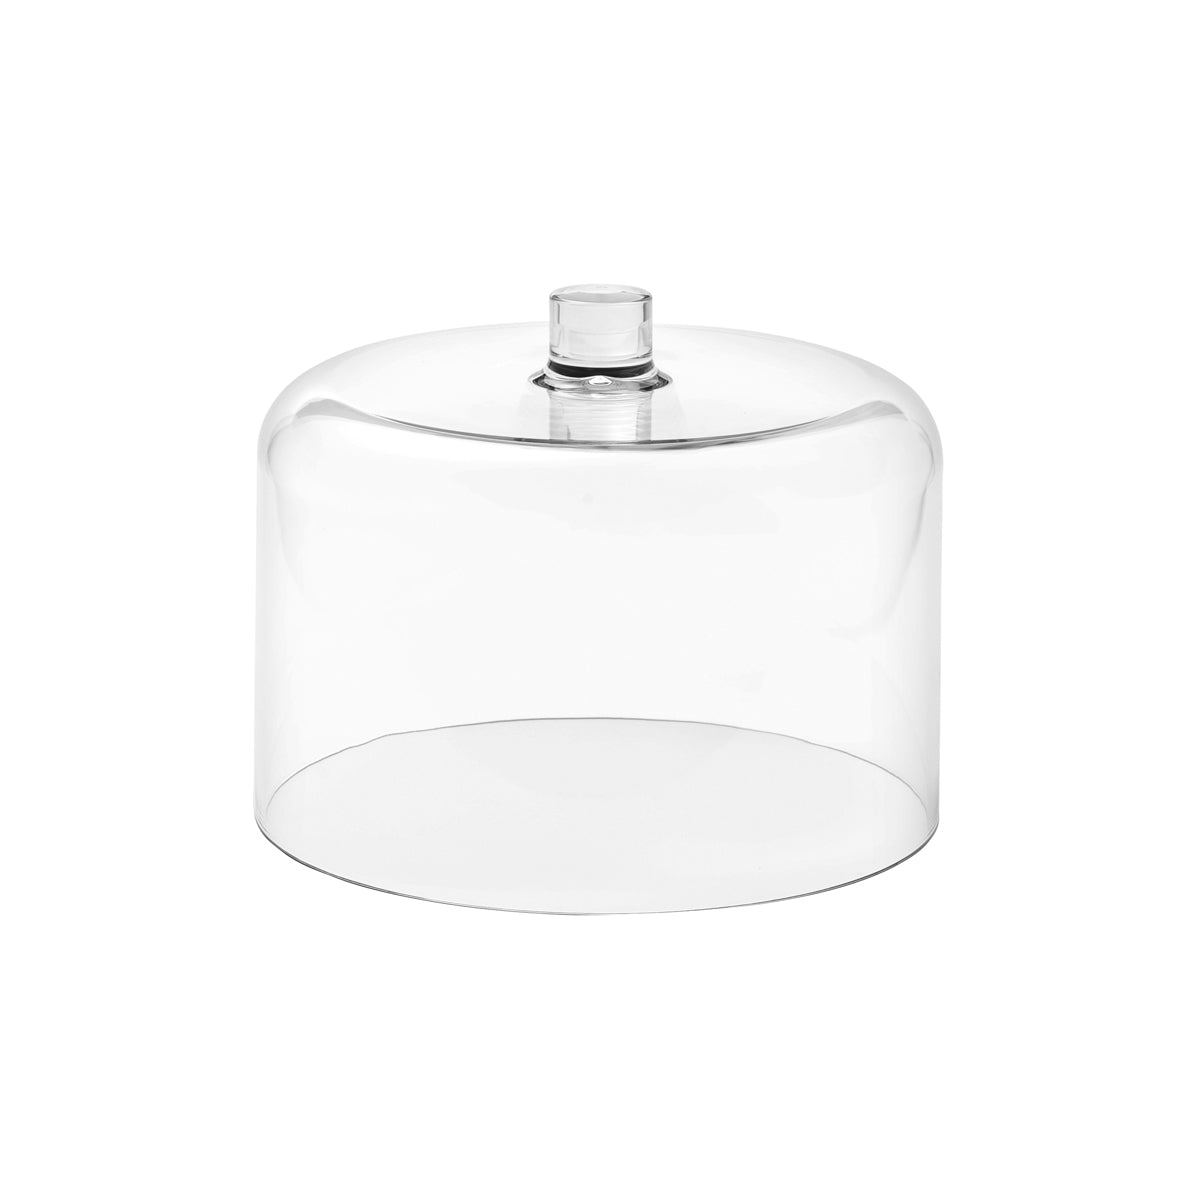 '04174 Chef Inox Cloche Straight Sided Clear Polycarbonate 275x212mm Tomkin Australia Hospitality Supplies